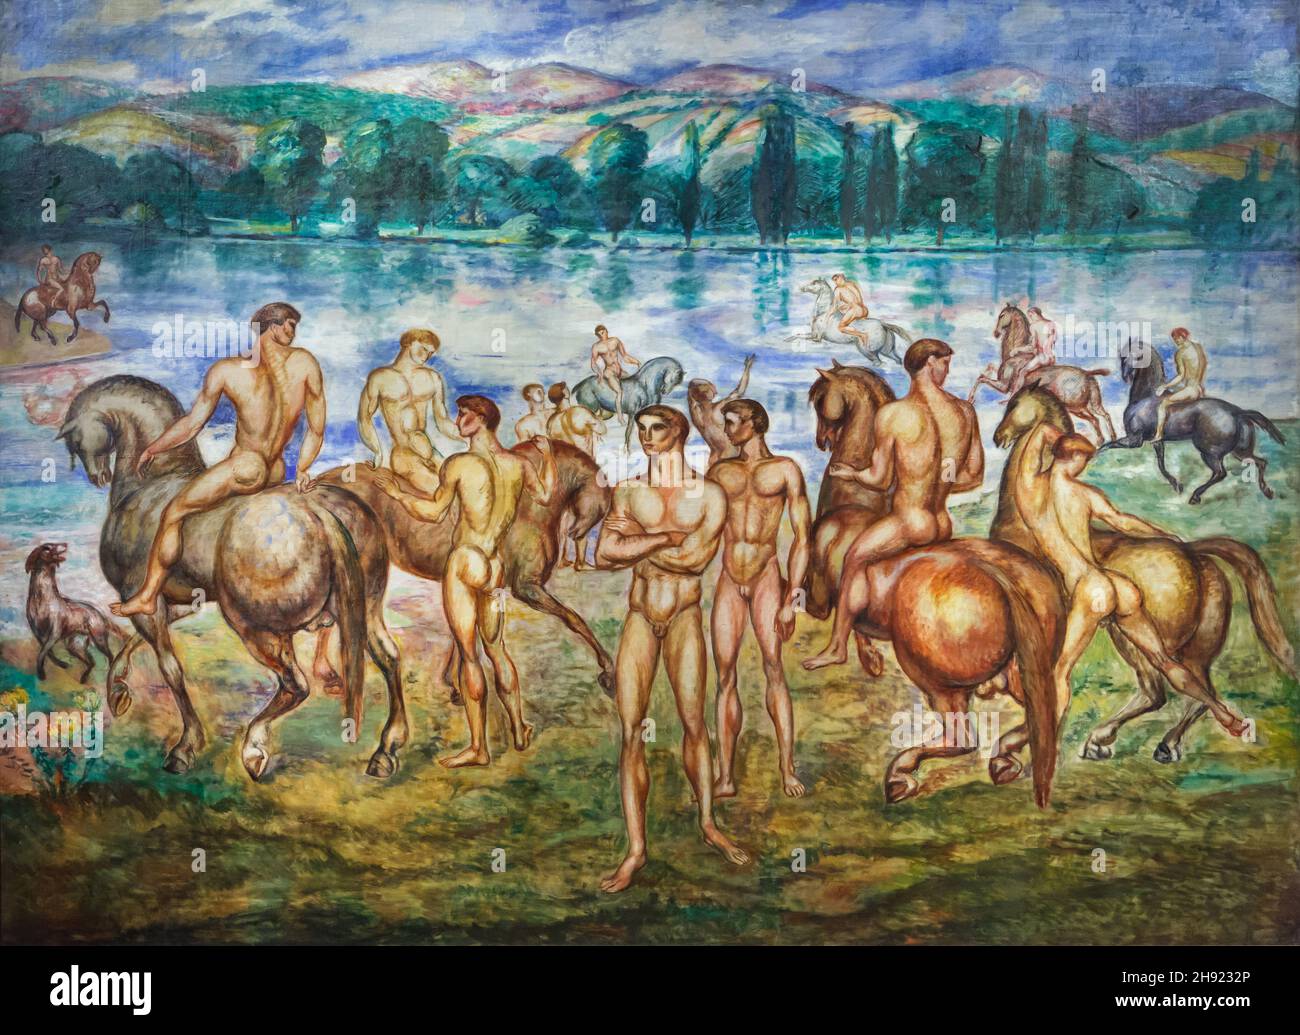 Painting 'Riders on the Shore' by Hungarian modernist painter Károly Kernstok (1910) on displаy in the Hungаrian Nаtional Gаllery (Mаgyar Nеmzeti Gаleria) in Budаpest, Hungаry. Stock Photo